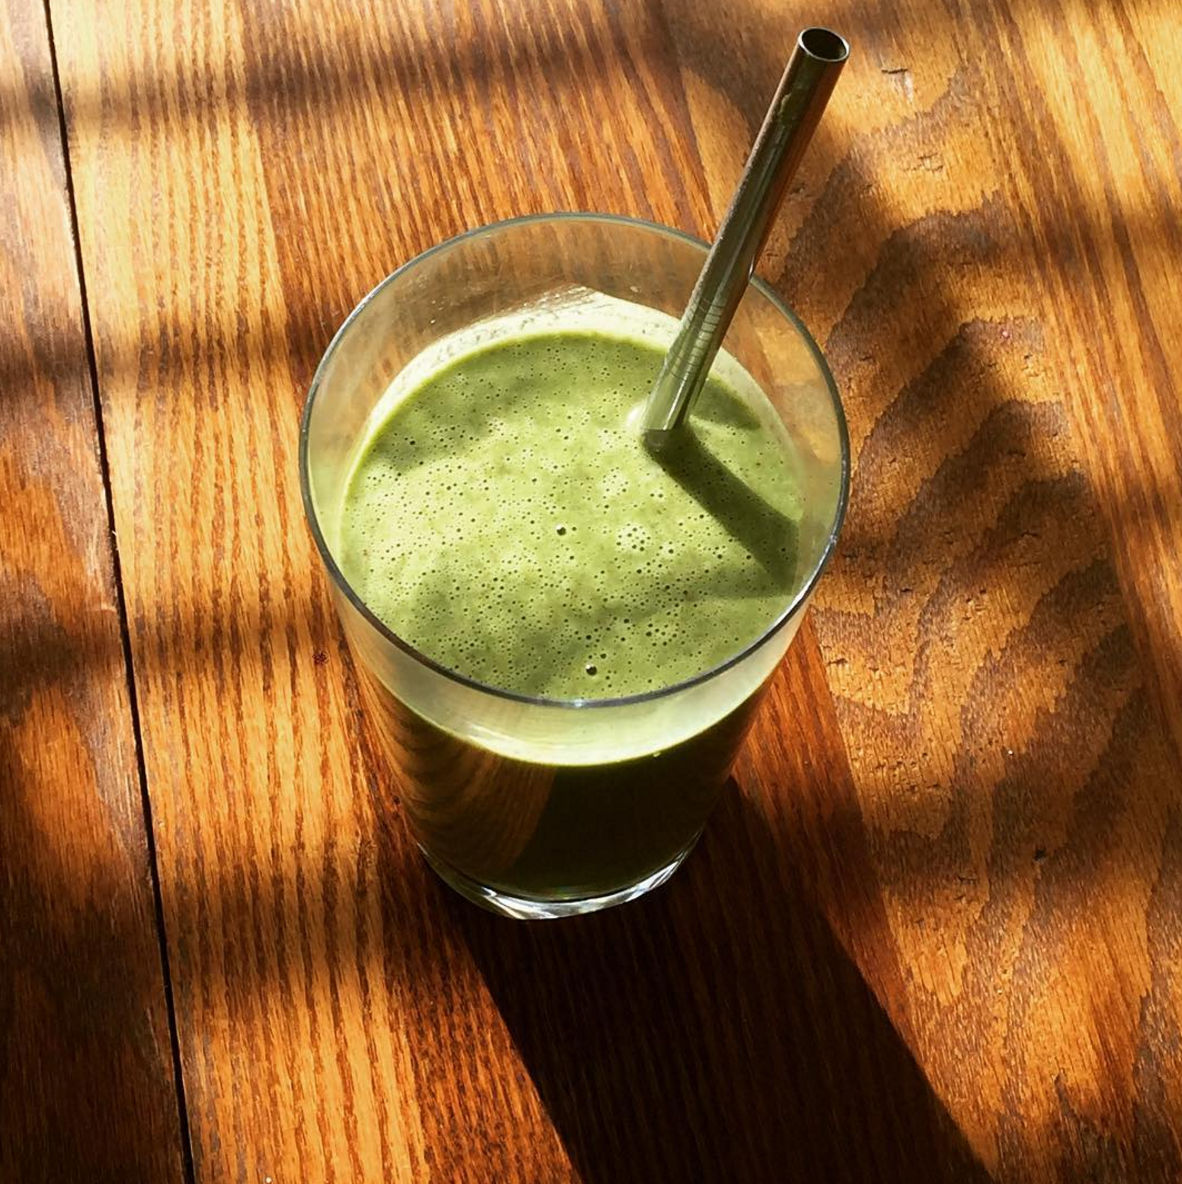 banana green smoothie on wooden table